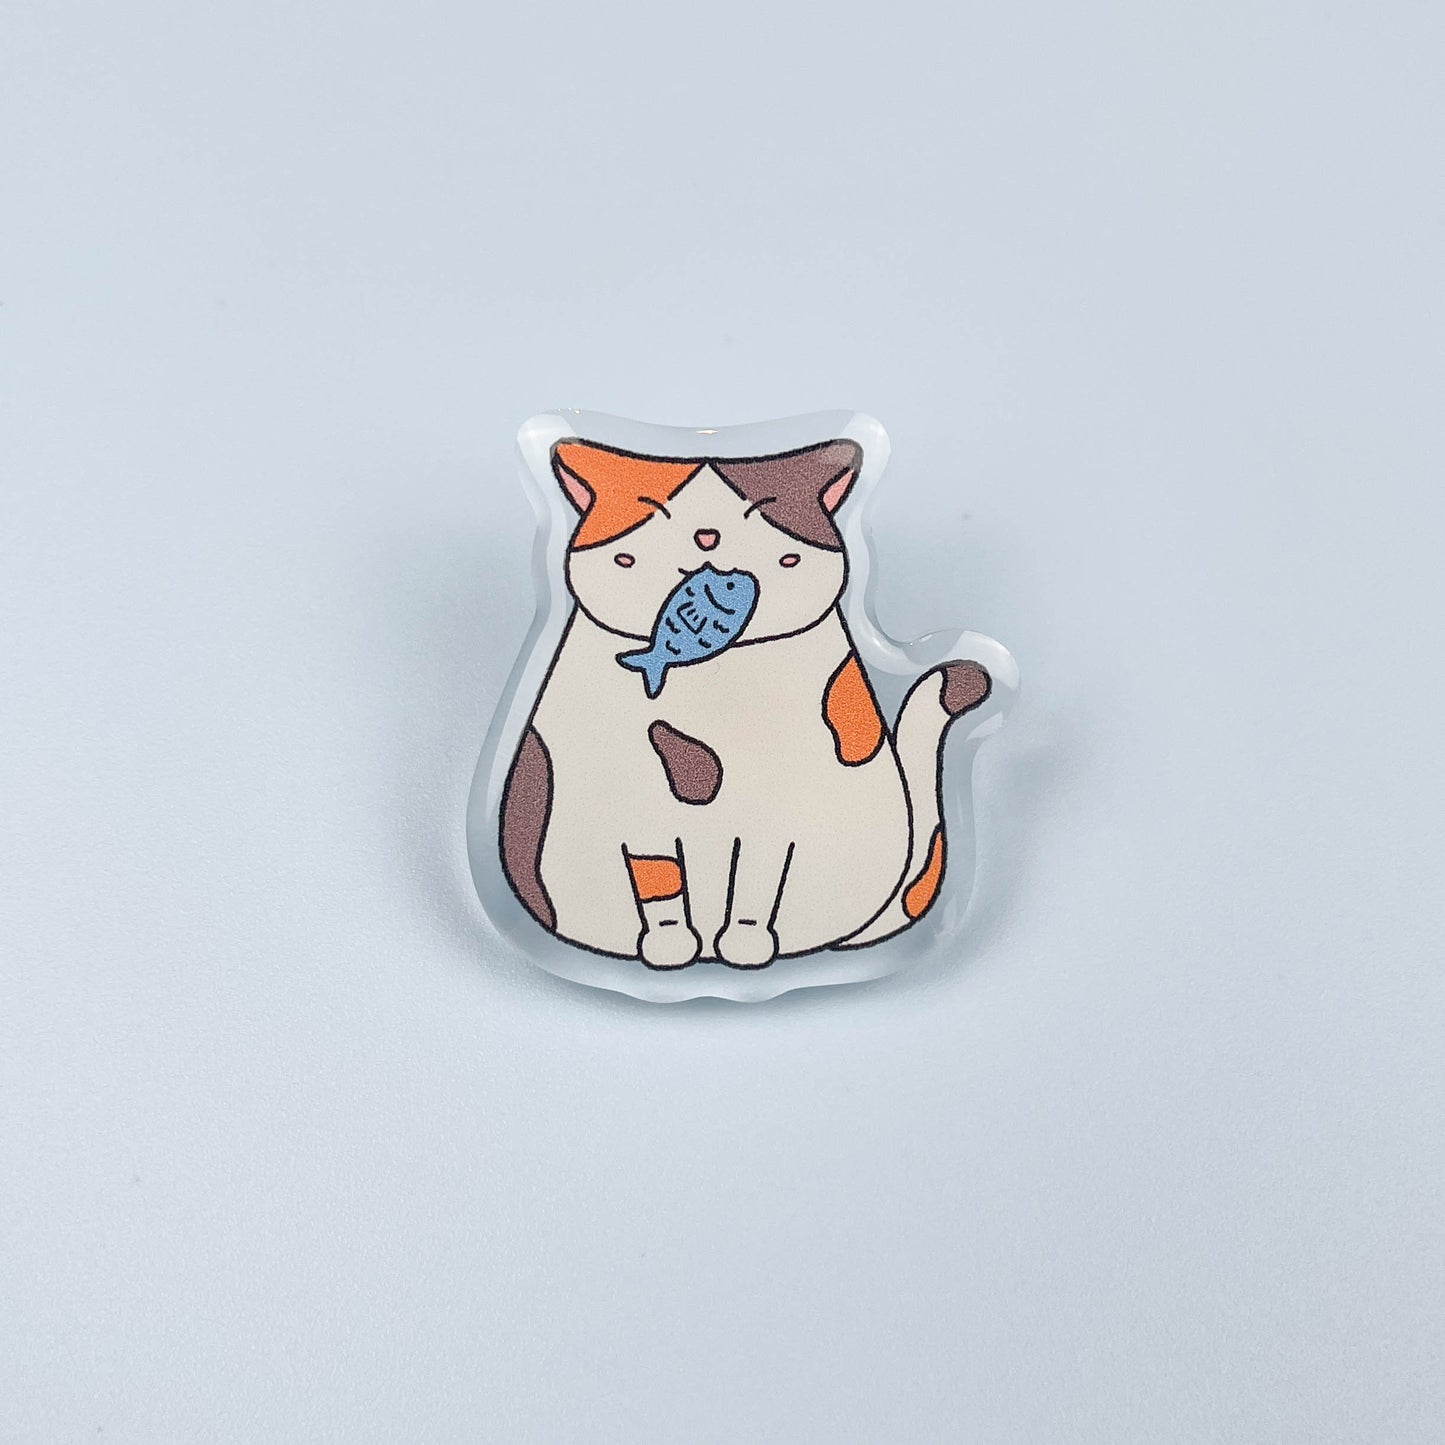 Calico Cat With Fish Acrylic Pin